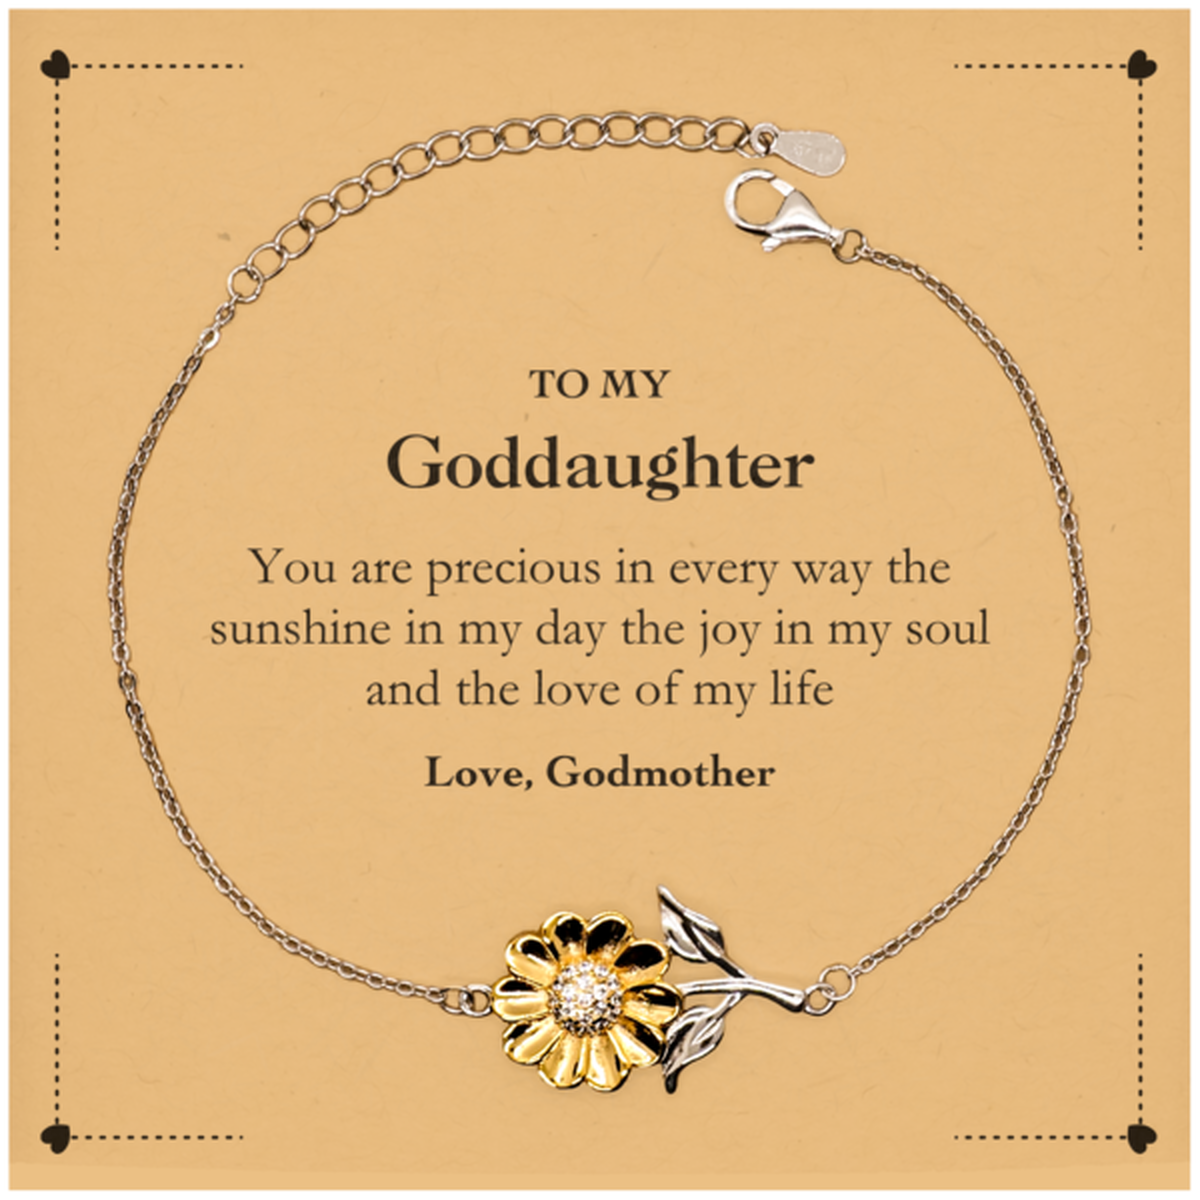 Graduation Gifts for Goddaughter Sunflower Bracelet Present from Godmother, Christmas Goddaughter Birthday Gifts Goddaughter You are precious in every way the sunshine in my day. Love, Godmother